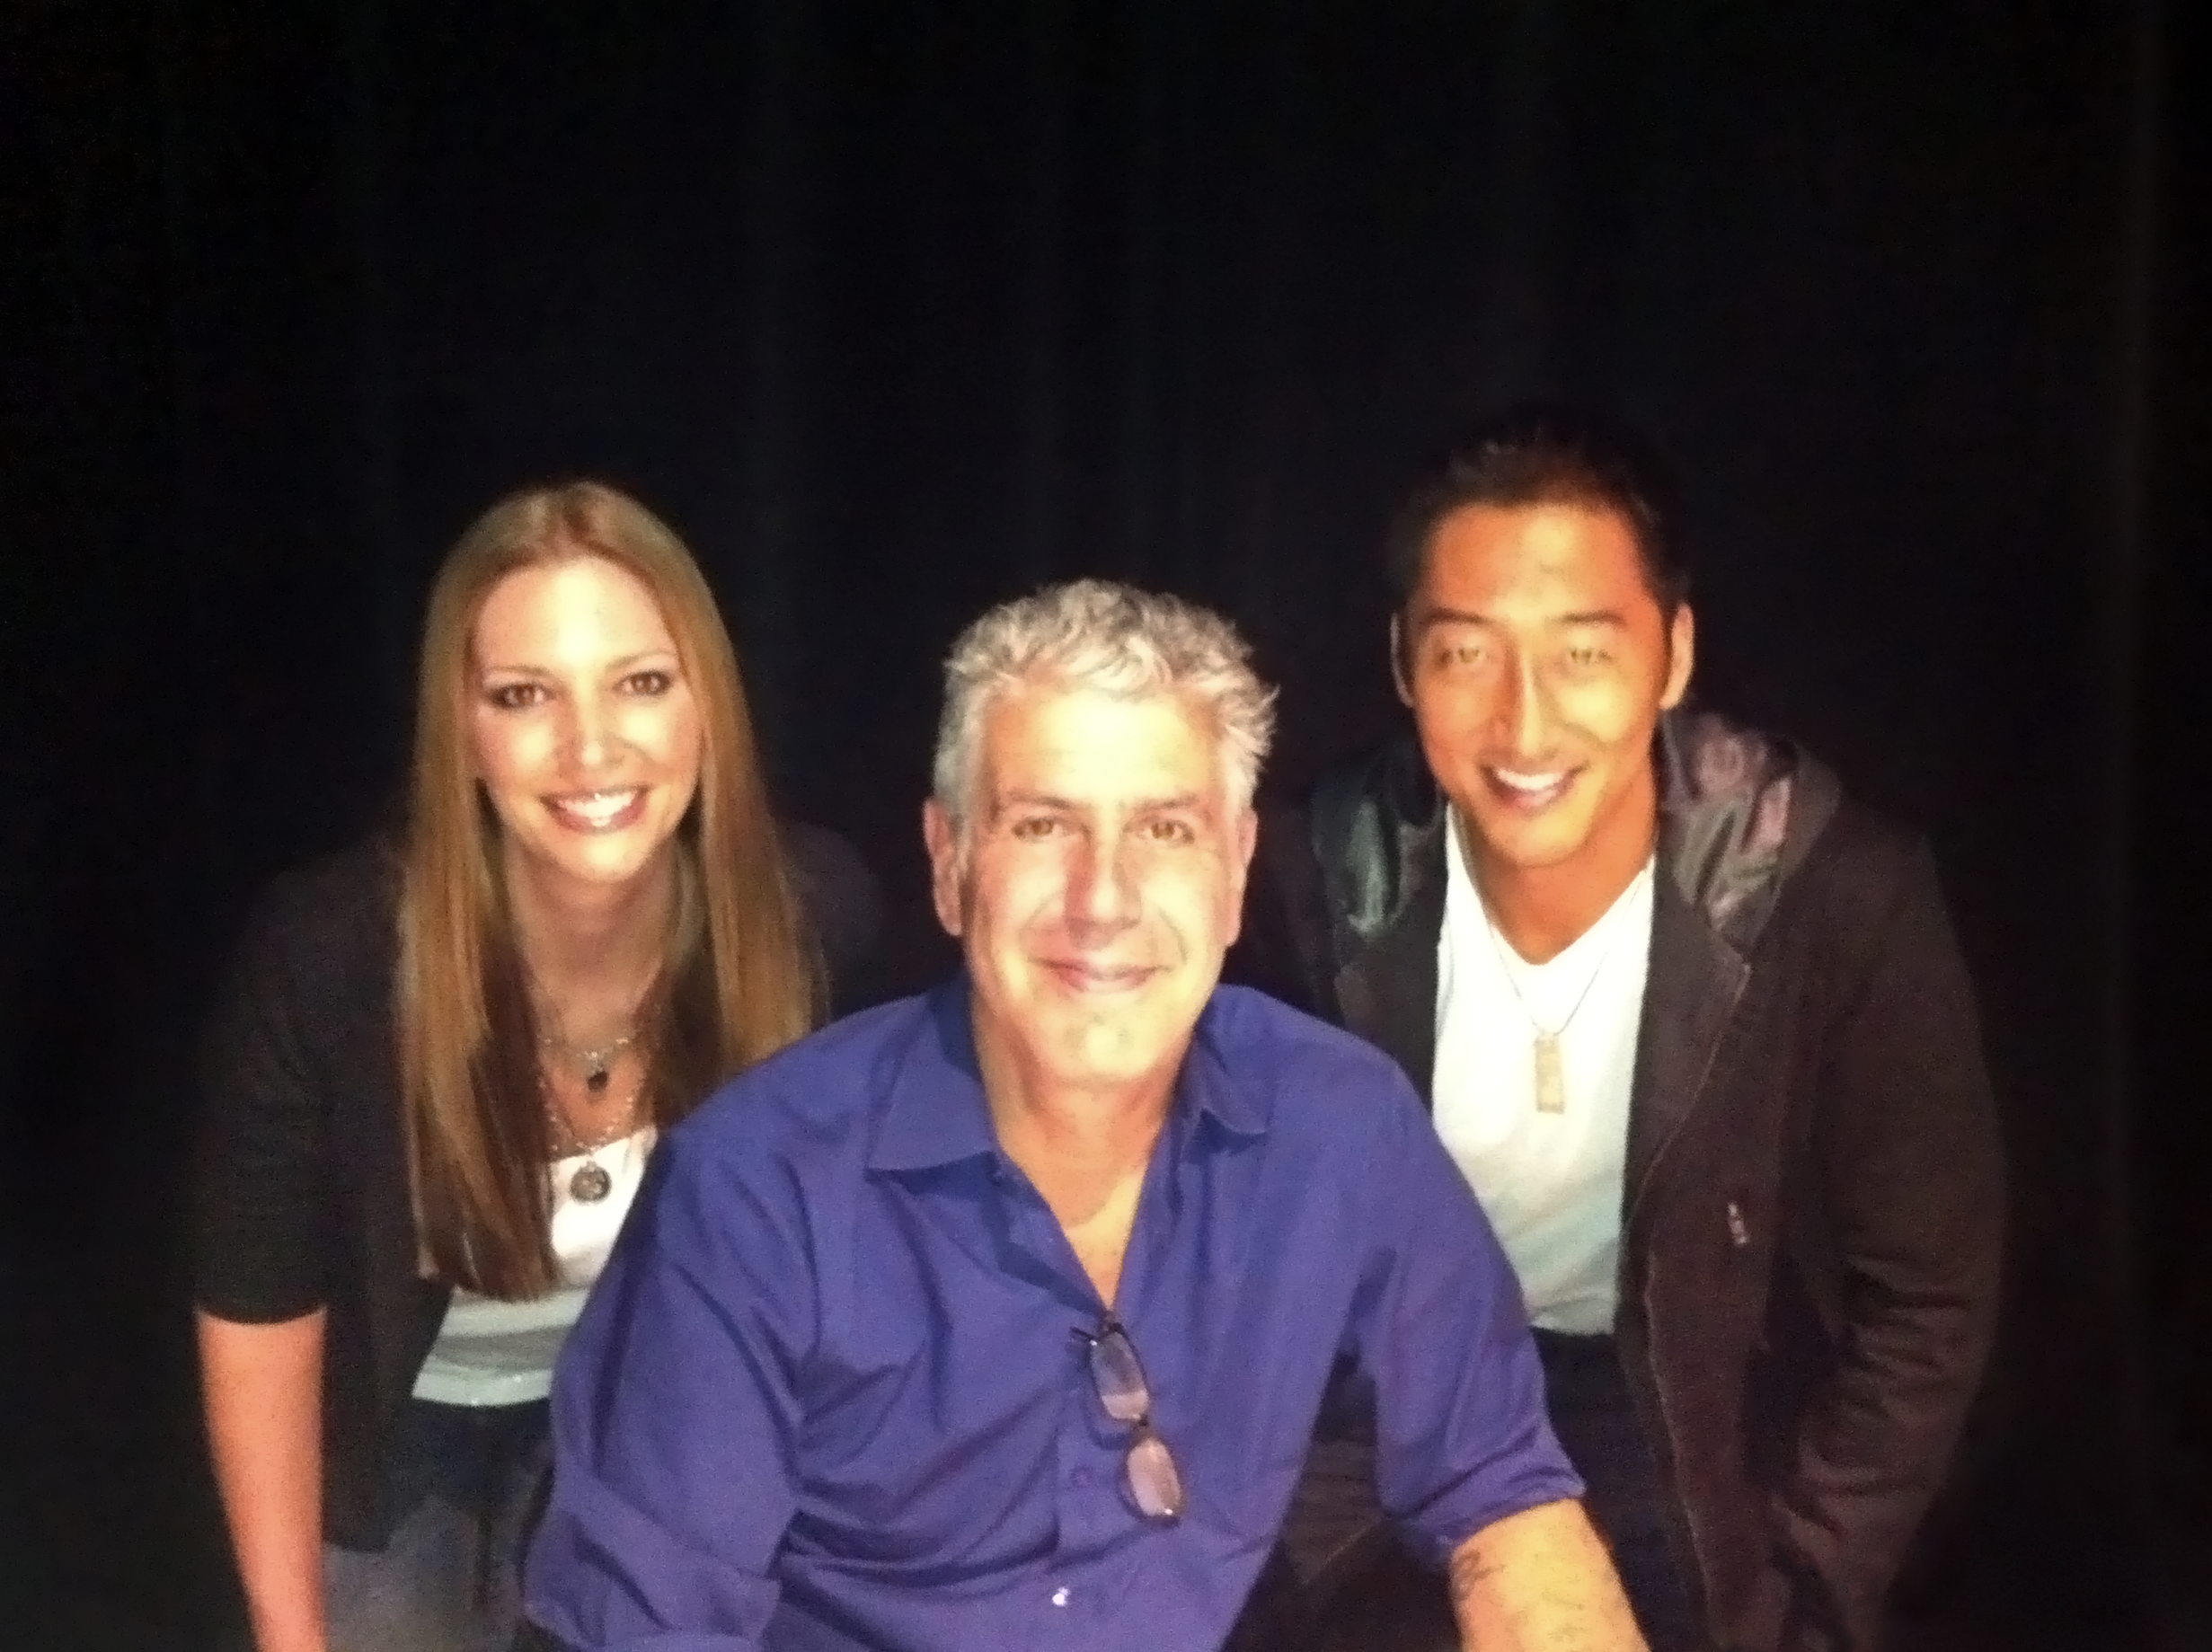 My Evening with Anthony Bourdain